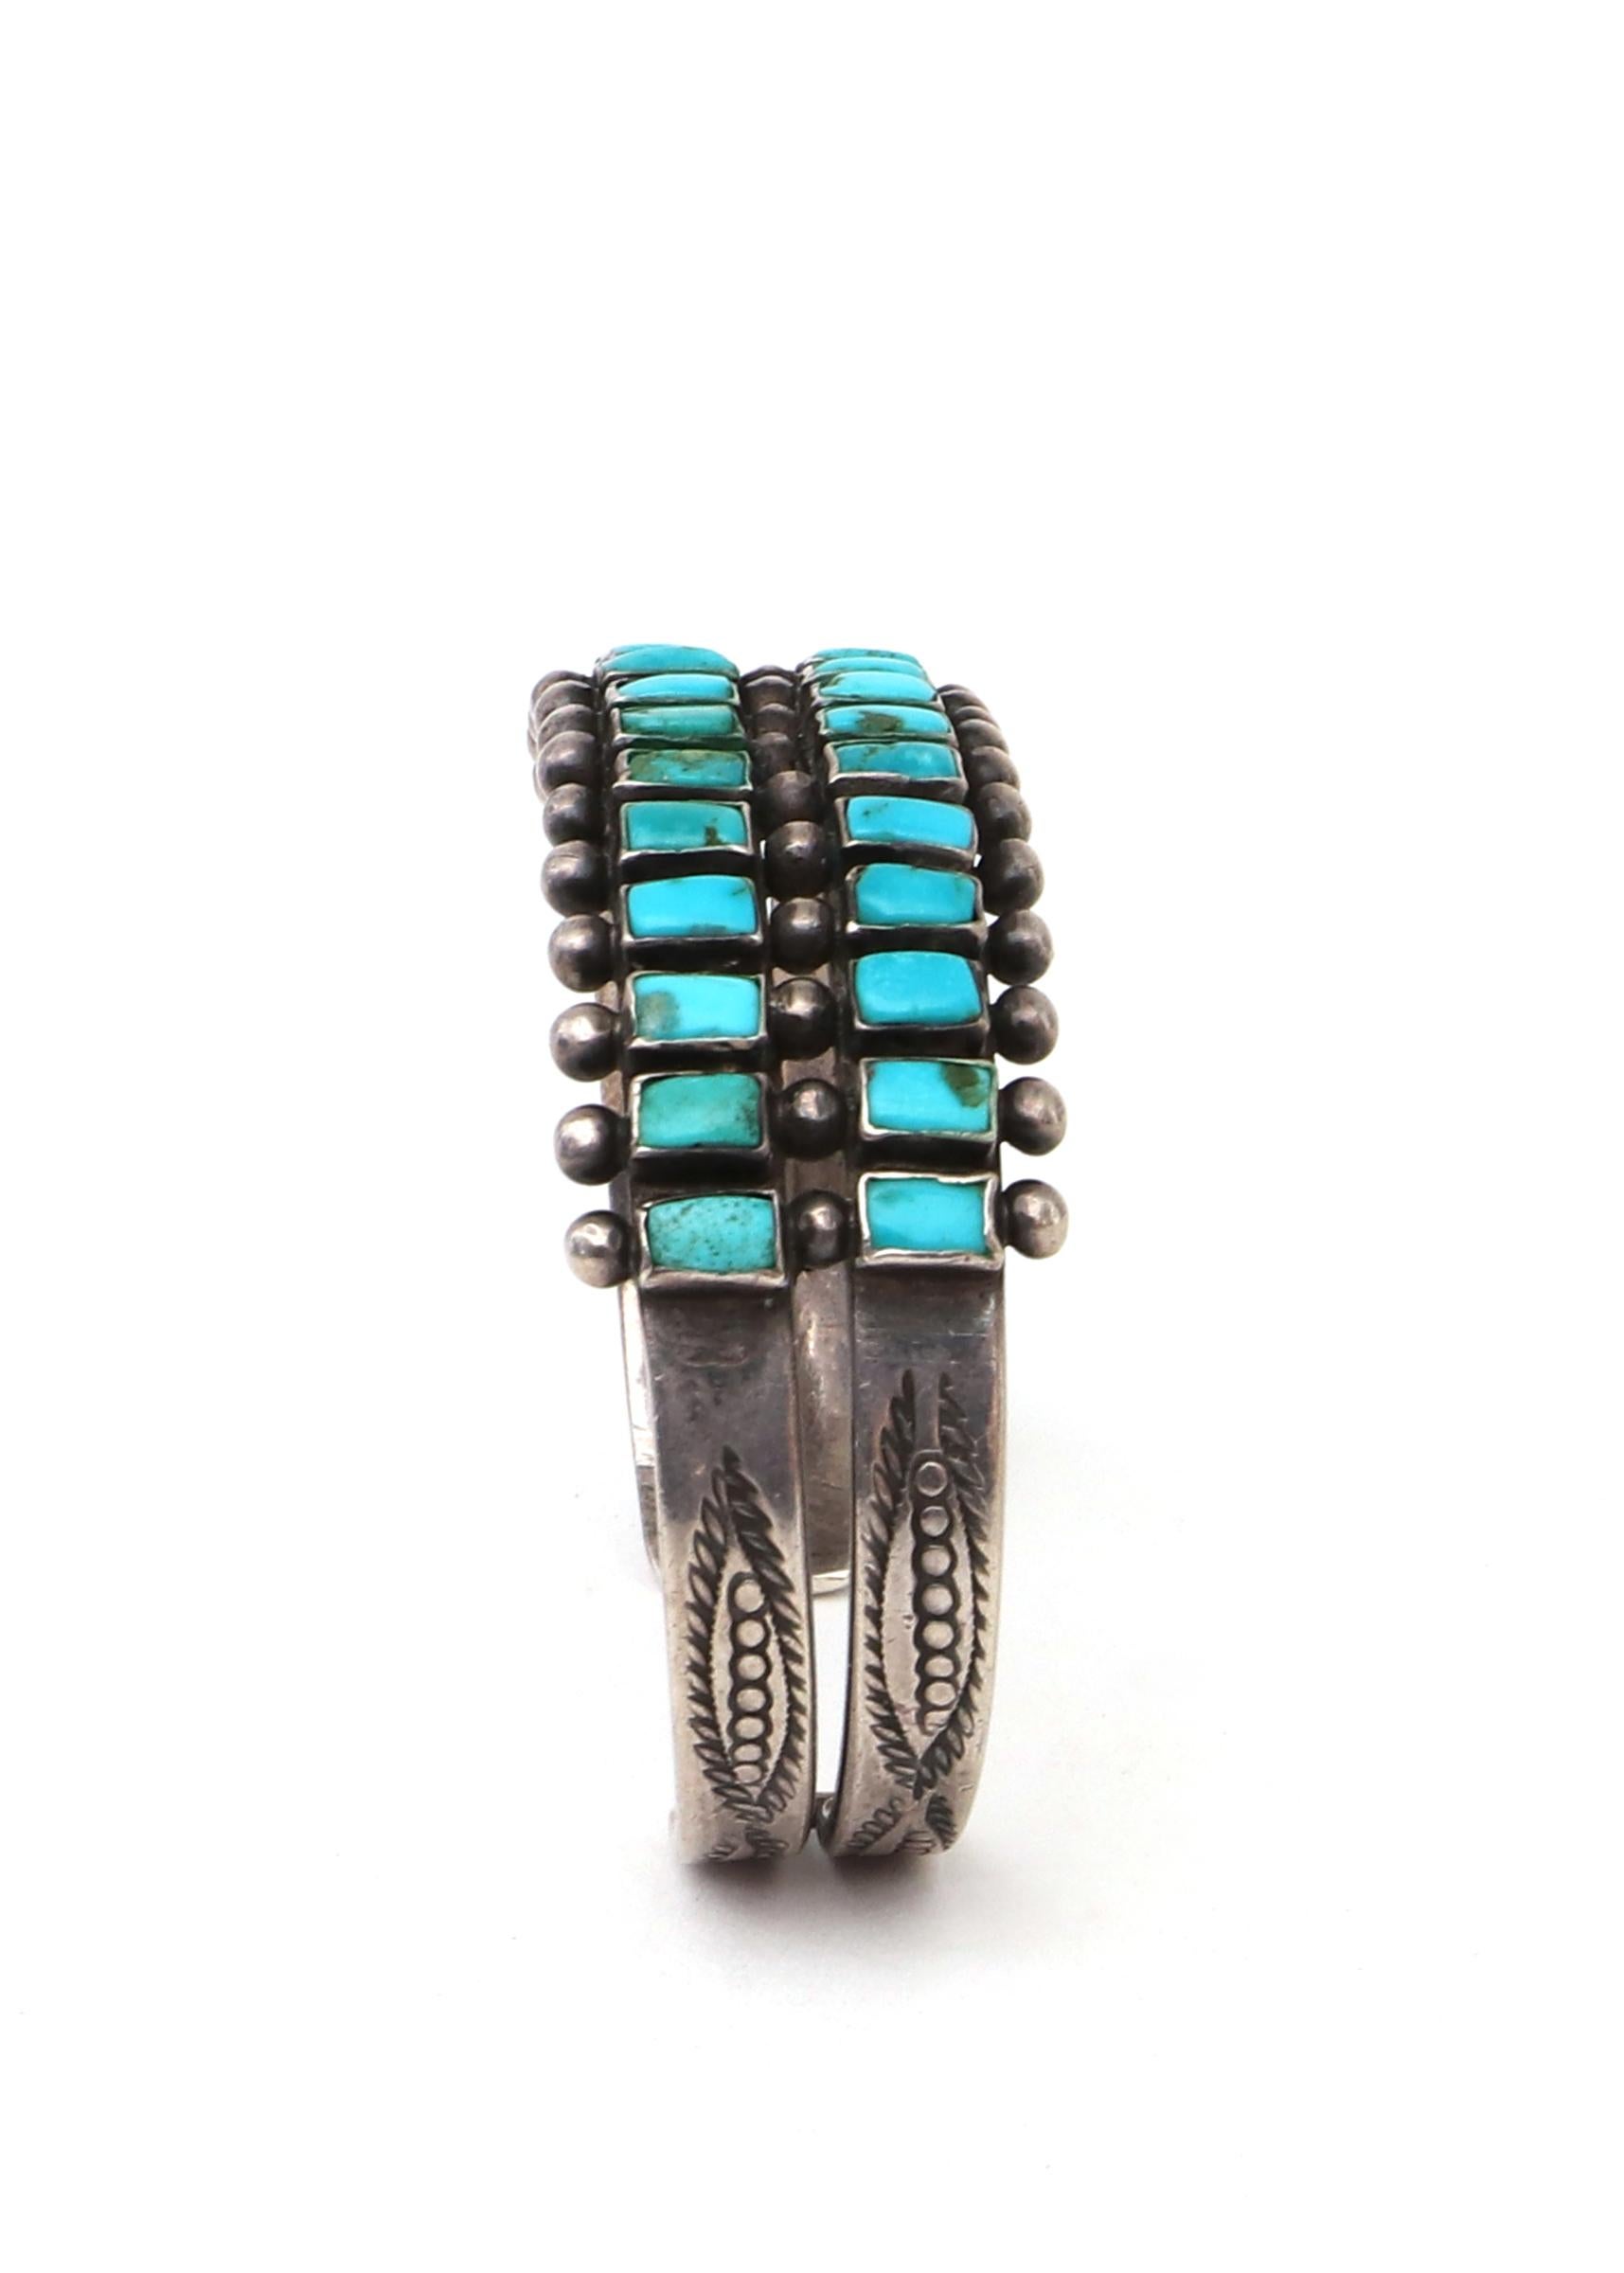 Old Pawn Zuni Pueblo (Native American Indian) cuff bracelet, vintage circa 1925, silver with two rows of square Sleeping Beauty turquoise. The inner bracelet circumference measures approximately 5 ¾ inches with an opening measuring 1 inch (6 ¾